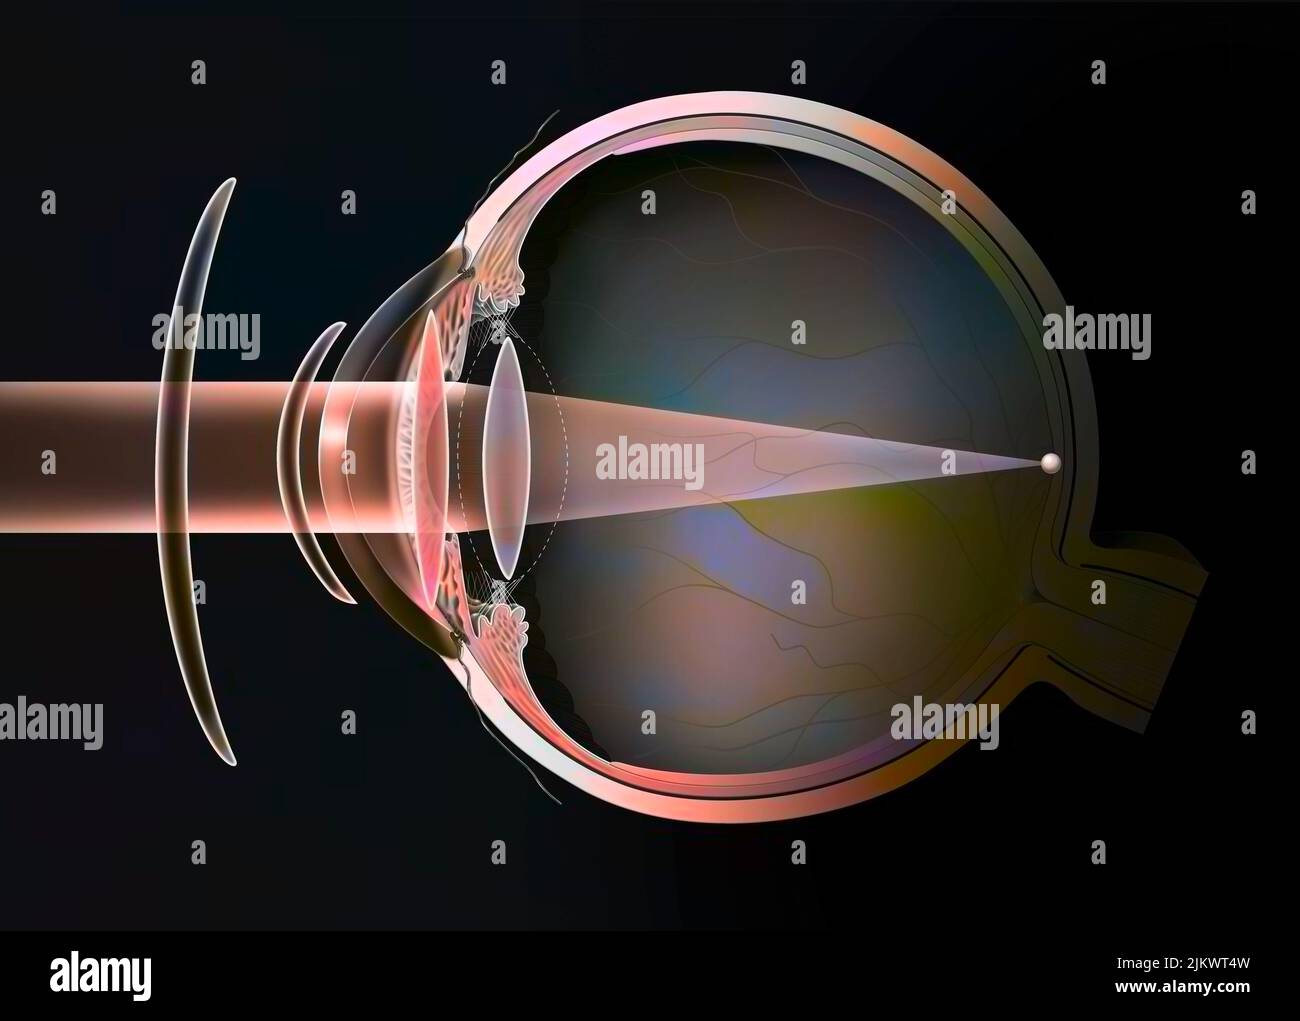 Different possible corrections of a presbyopic eye: spectacle lenses - external lenses. Stock Photo